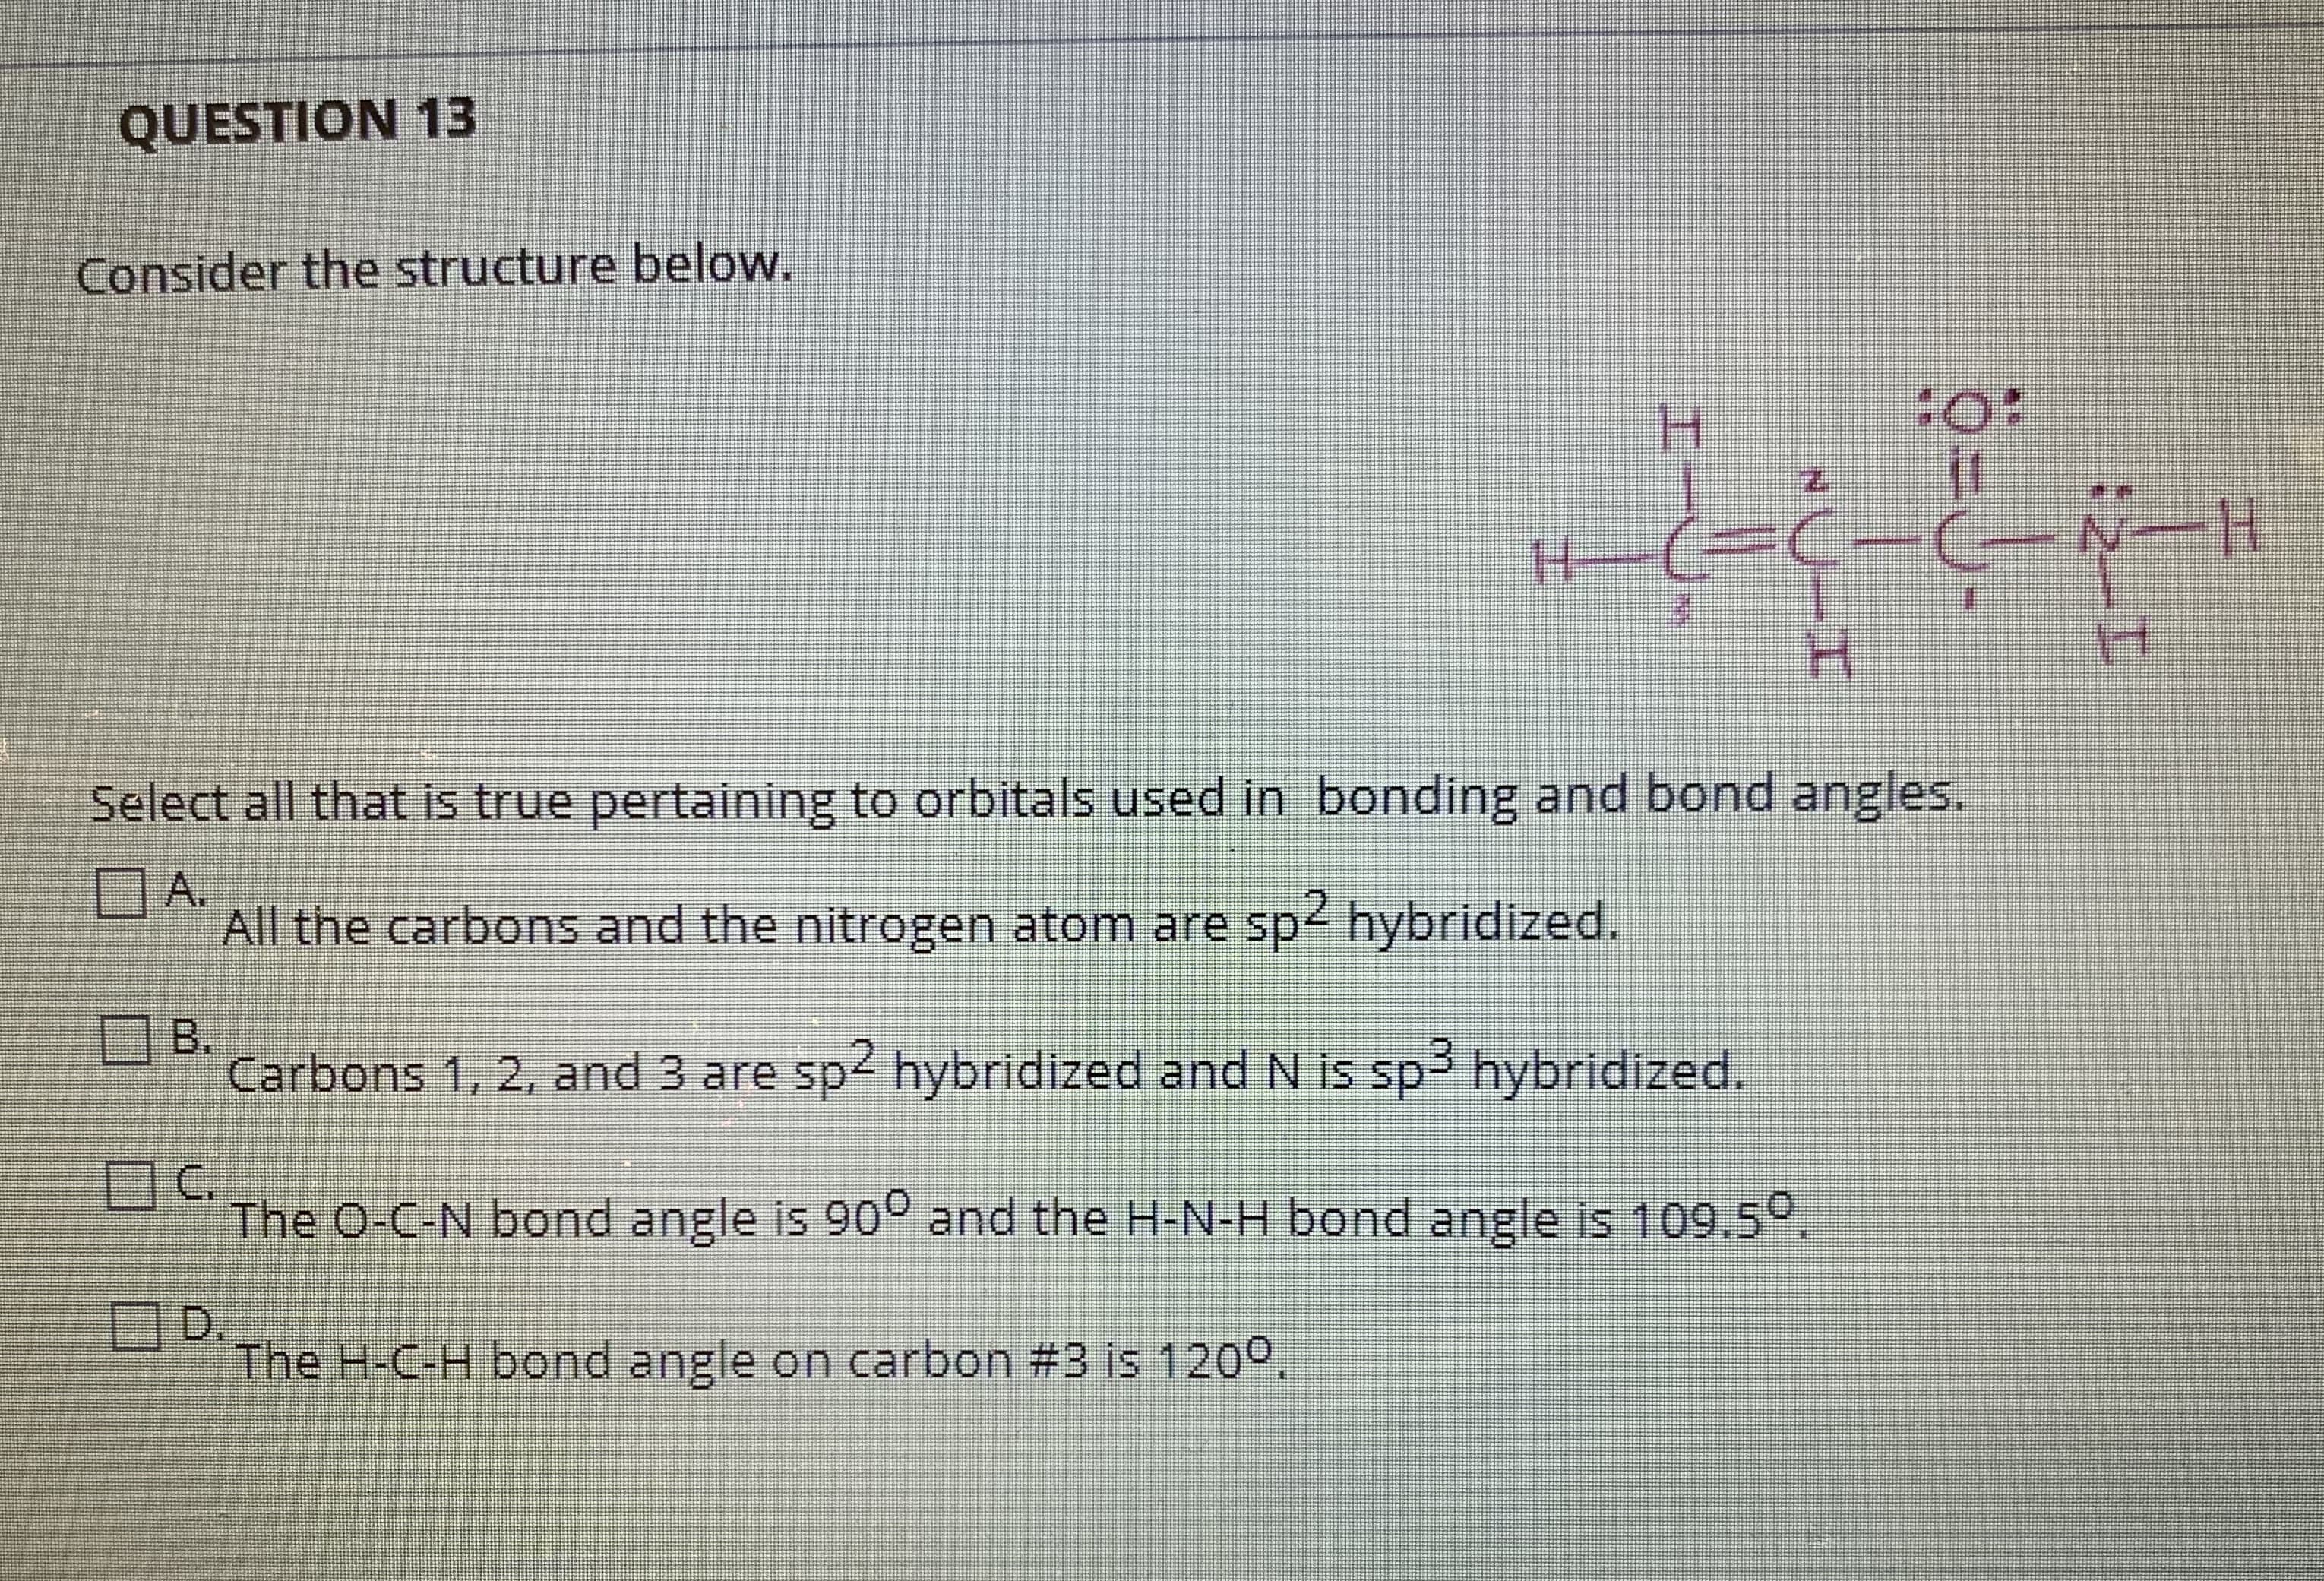 Select all that is true pertaining to orbitals used in bonding and bond angles.
DA.
All the carbons and the nitrogen atom are sp2 hybridized.
